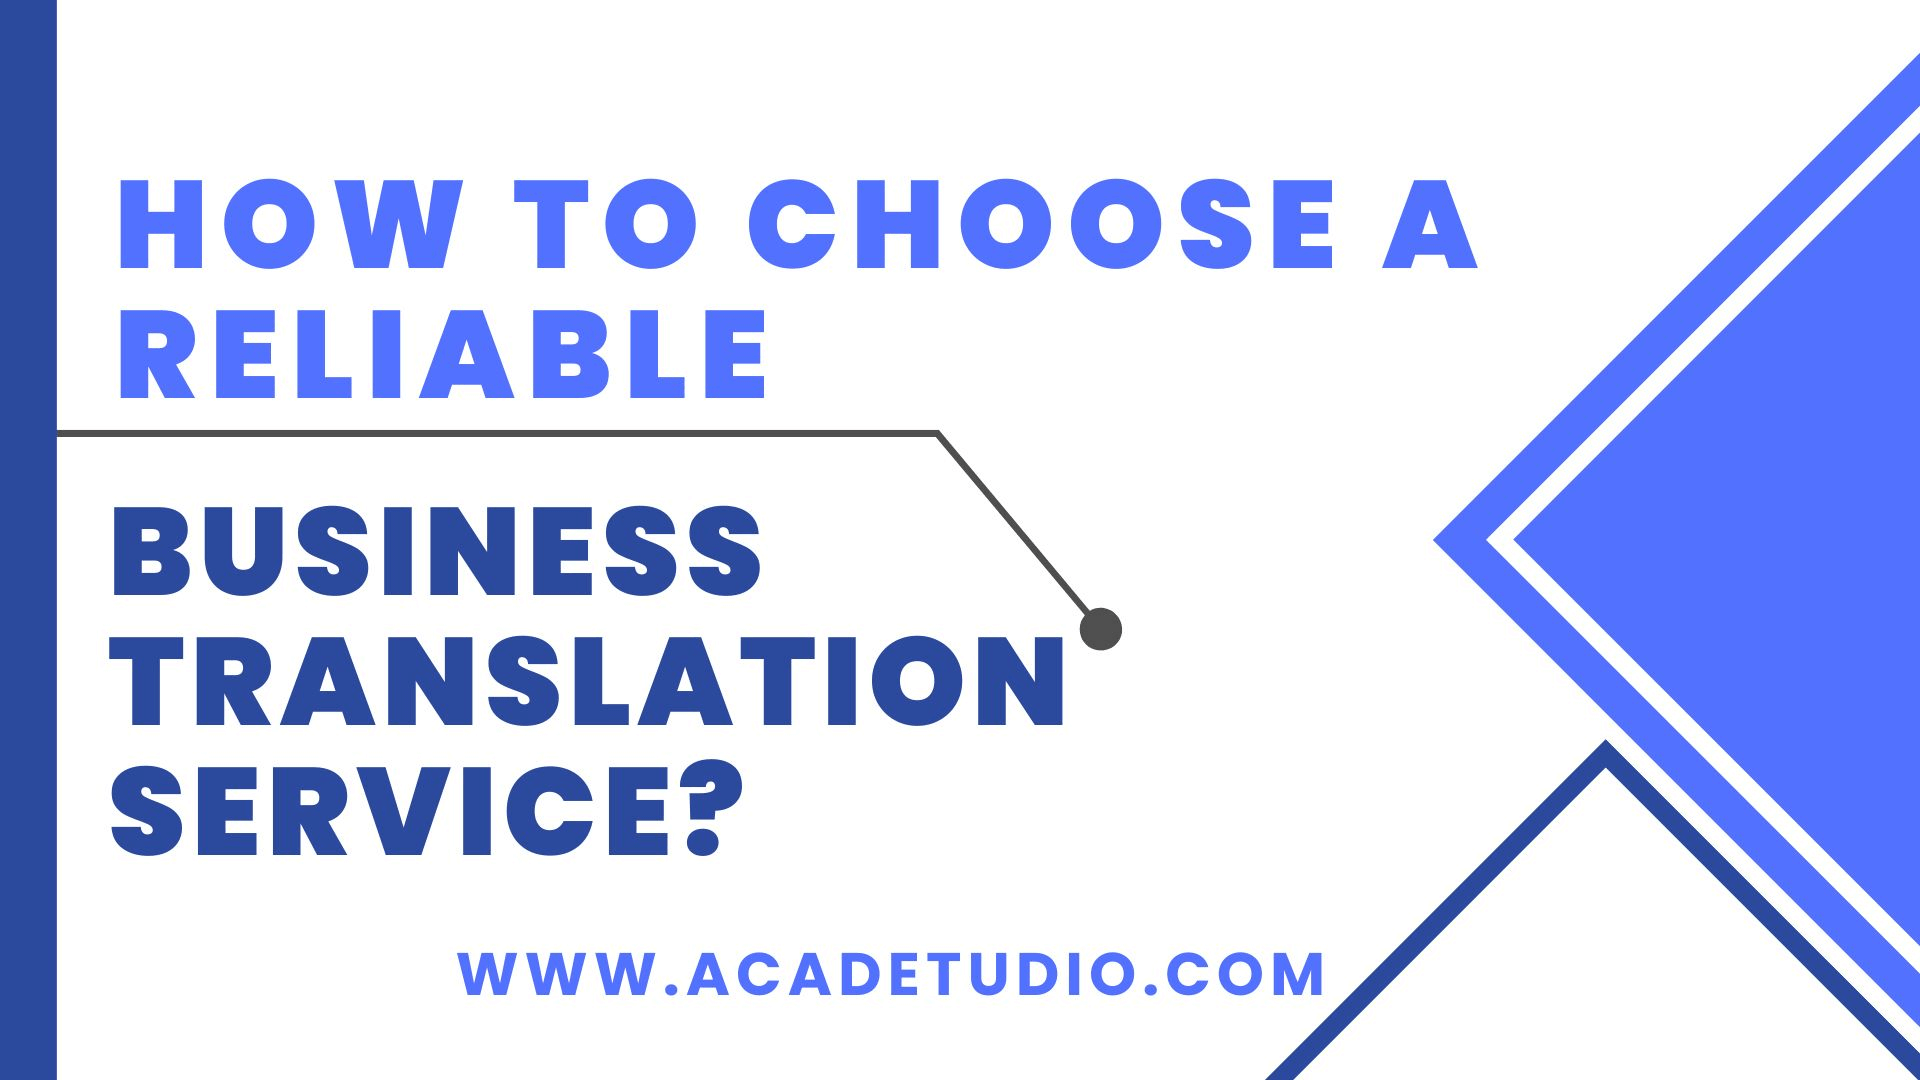 How to Choose a Reliable Business Translation Service?